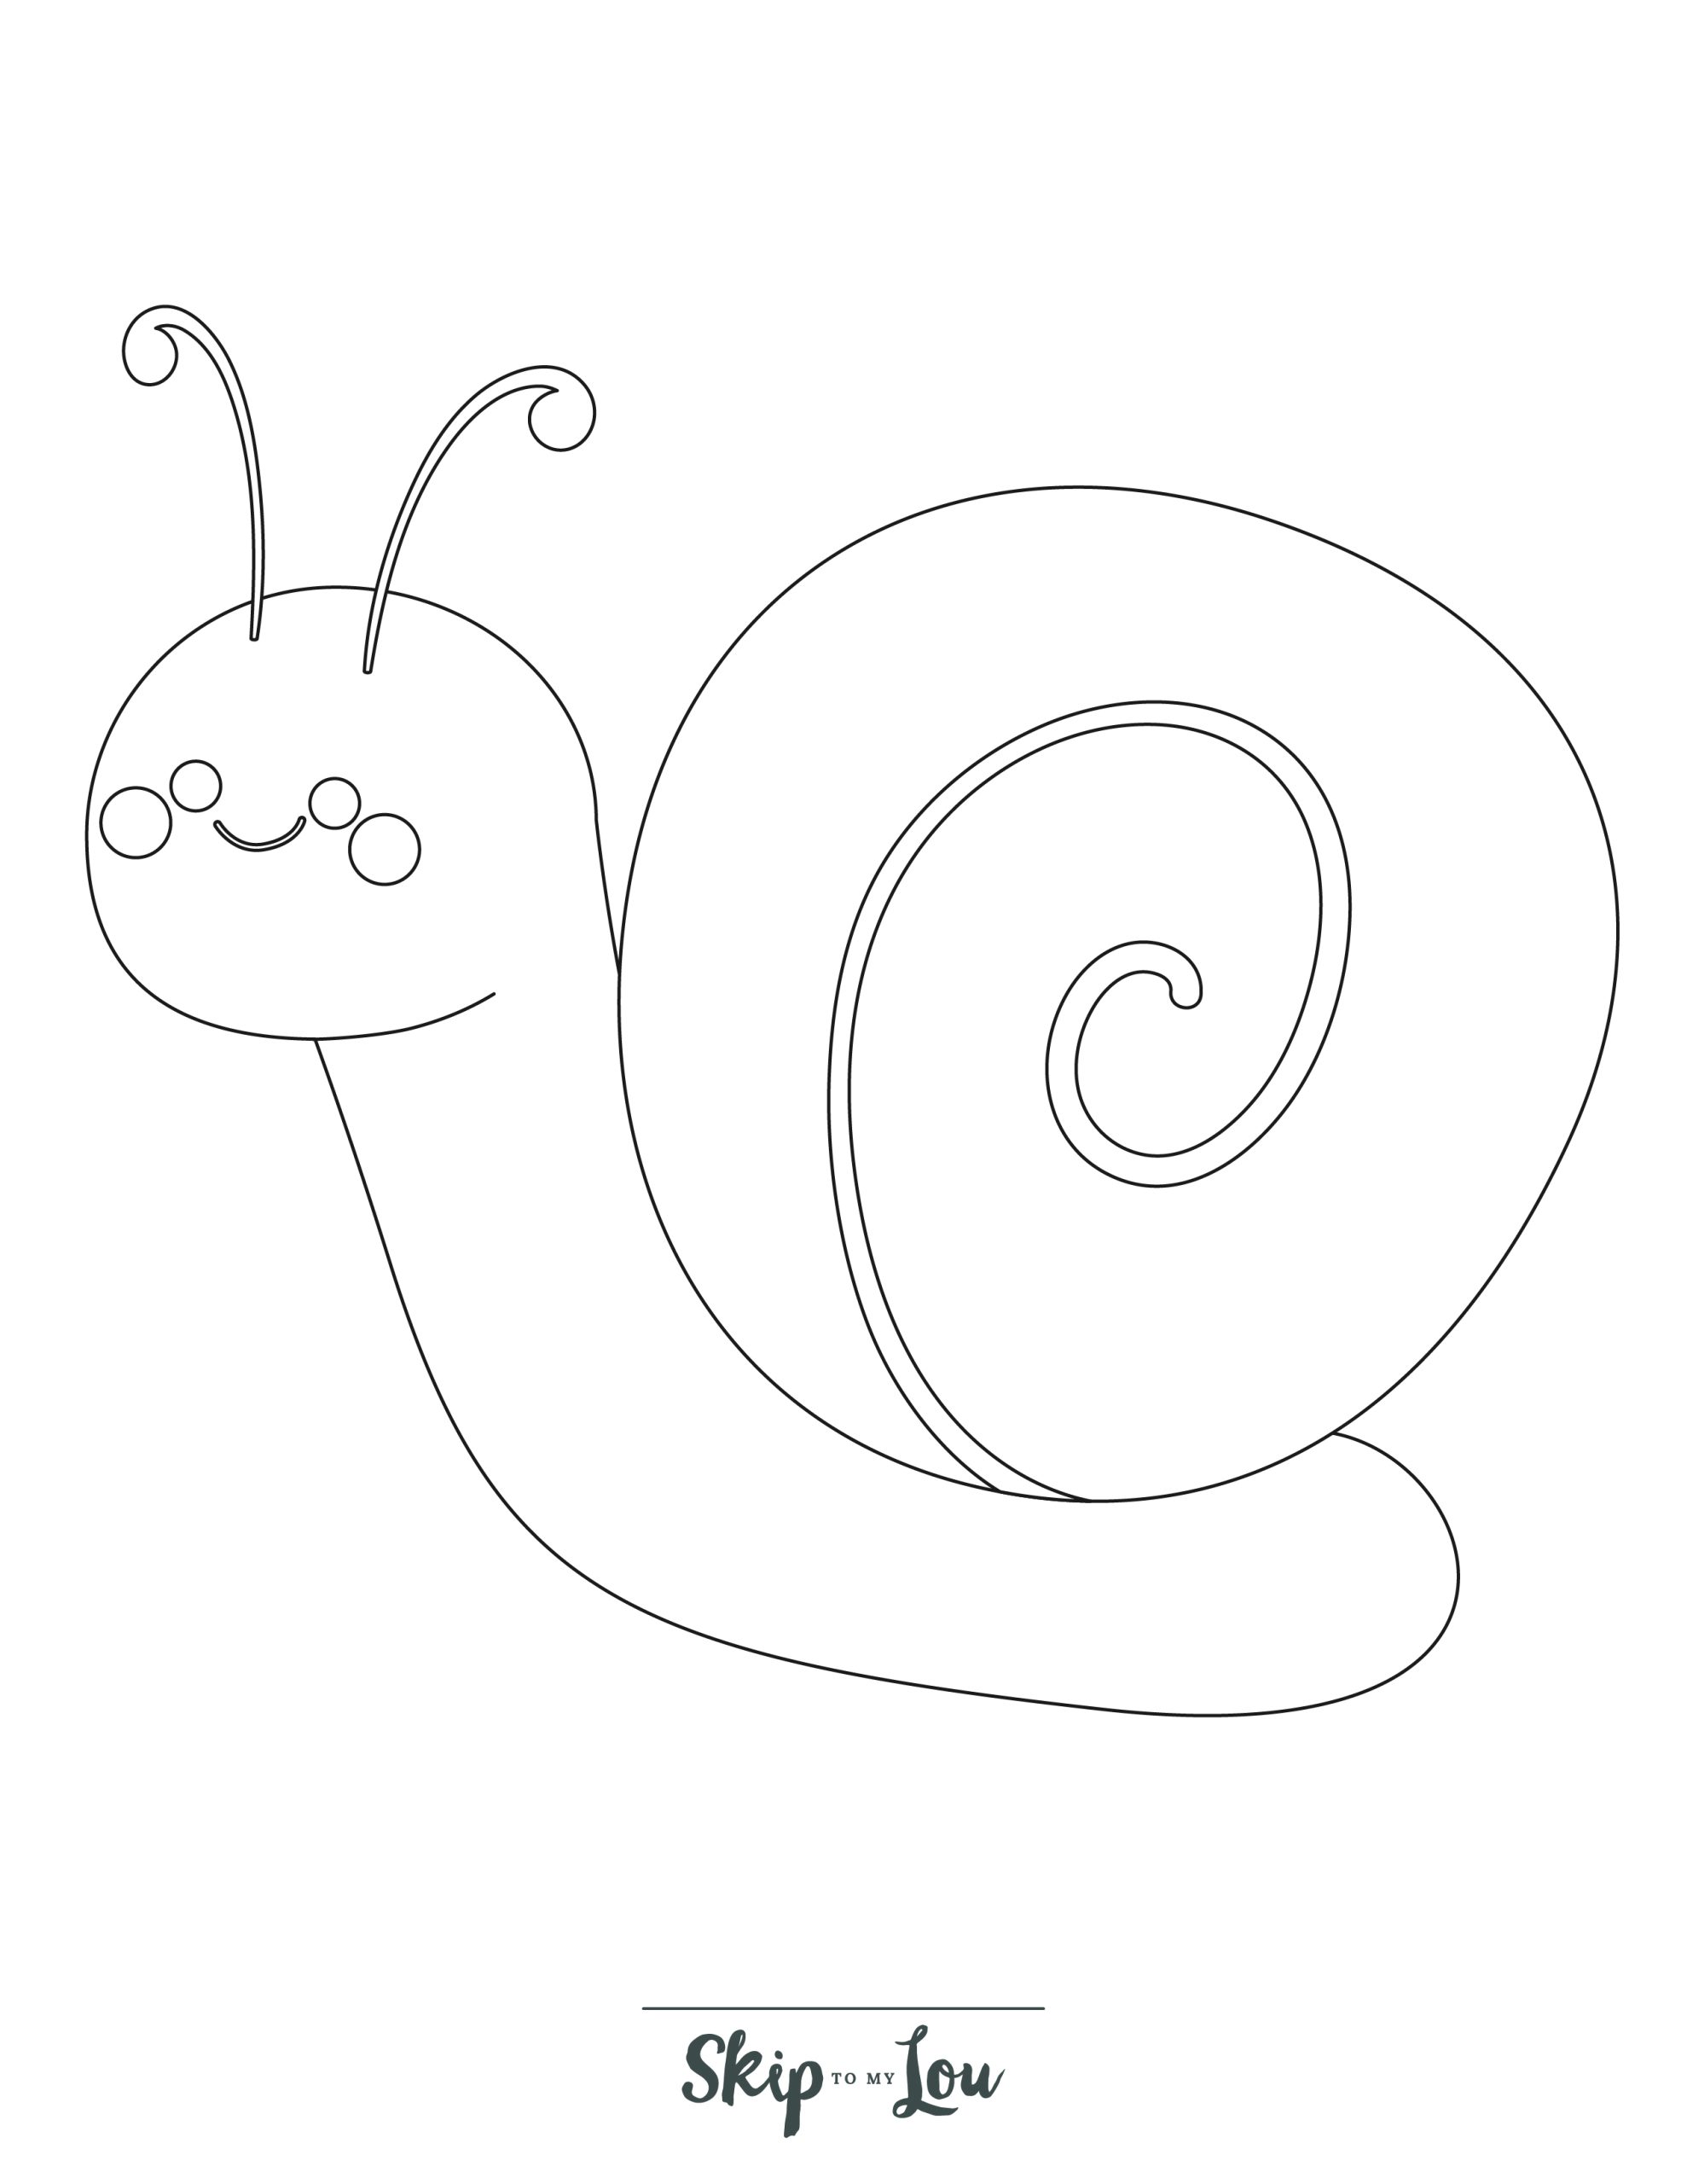 Preschool Coloring Page 12 - Simple line drawing of a snail 